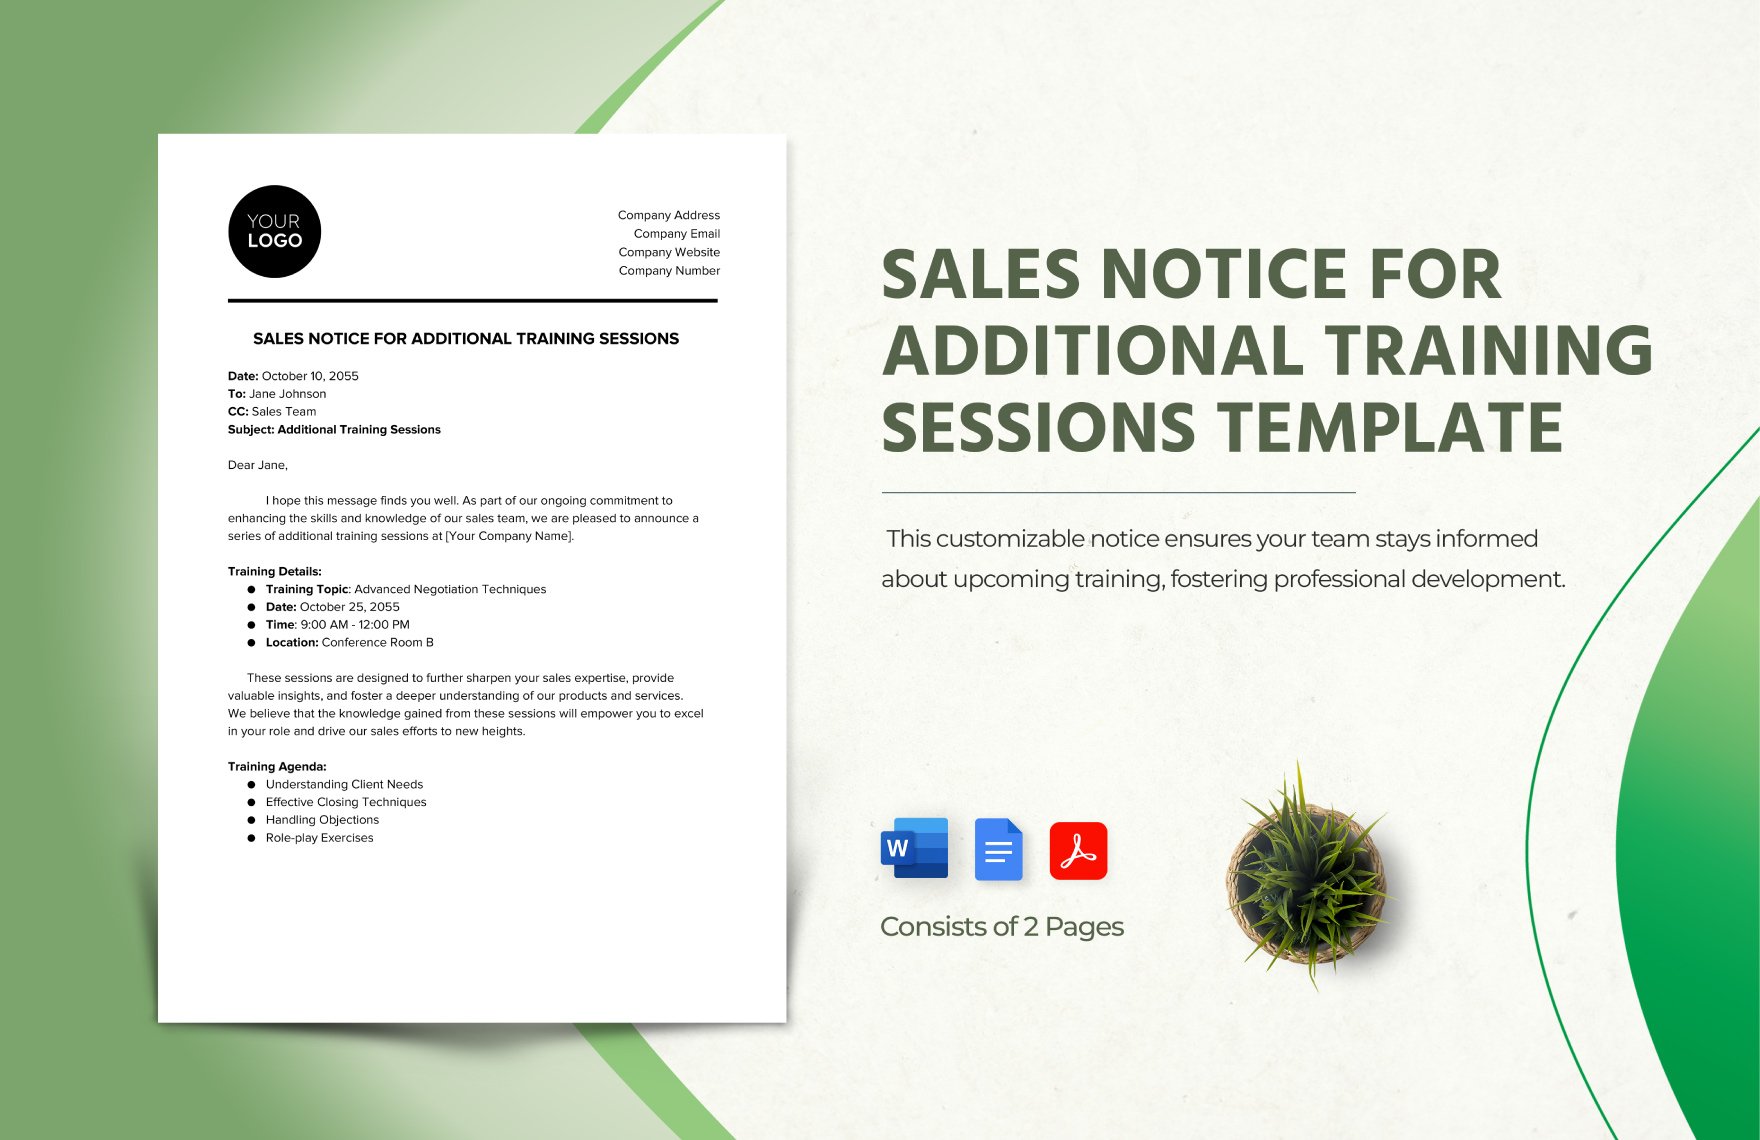 Sales Notice for Additional Training Sessions Template in Word, Google Docs, PDF